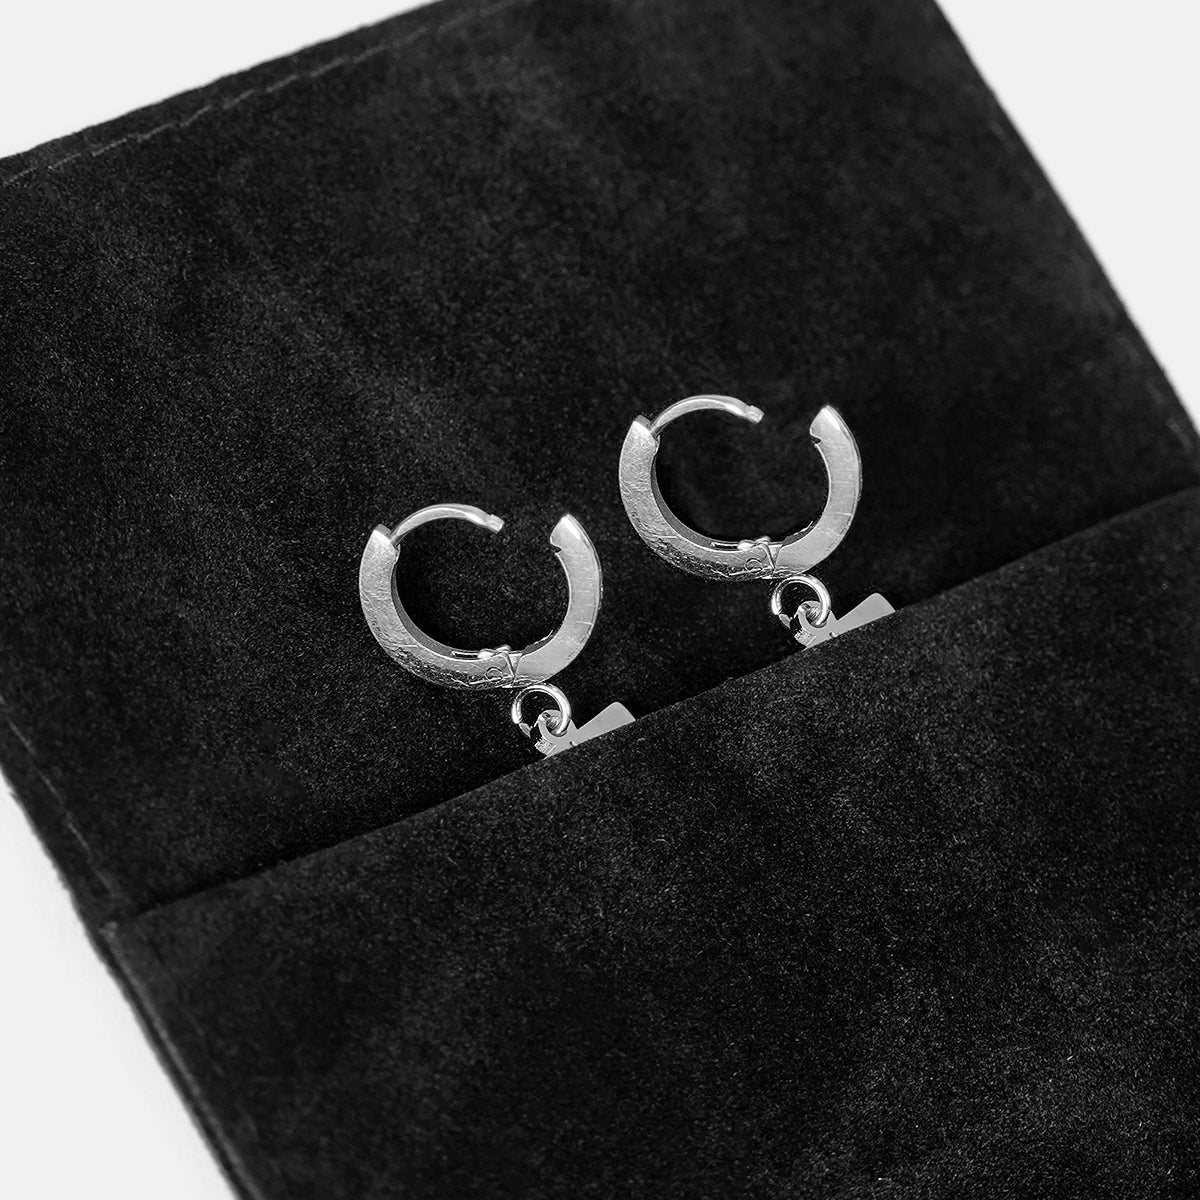 96 Number Earring - Stainless Steel